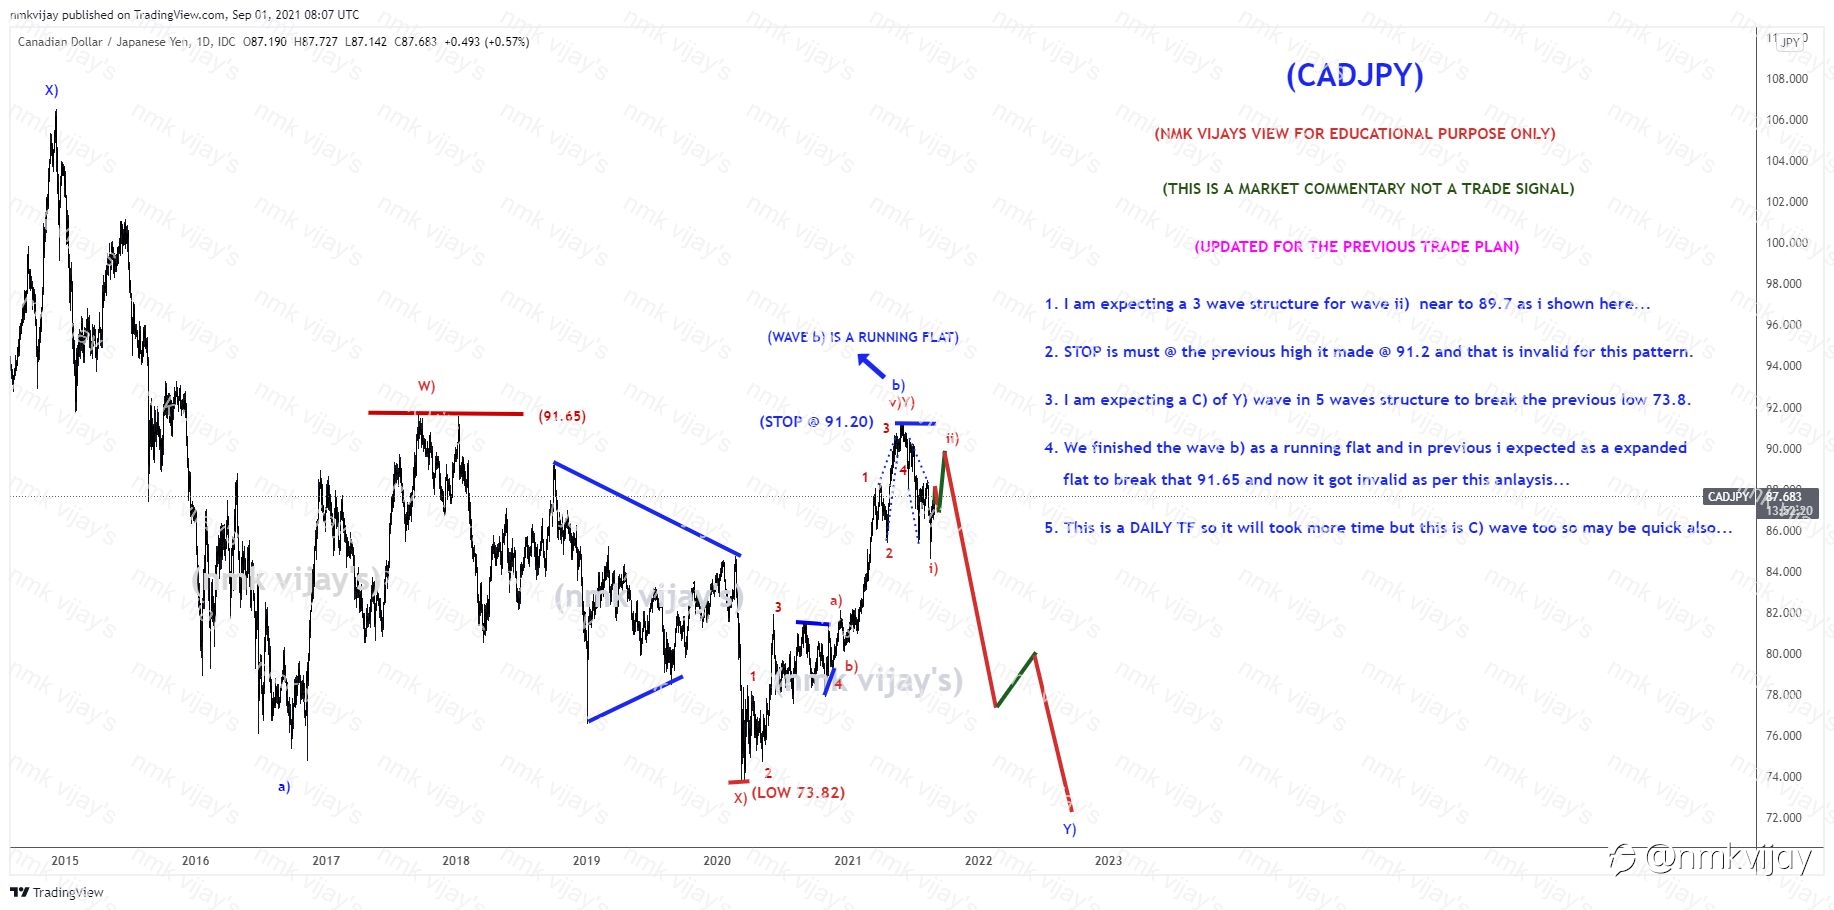 CADJPY-Expecting a 3 wave structure for wave ii) and STOP @ 91.2